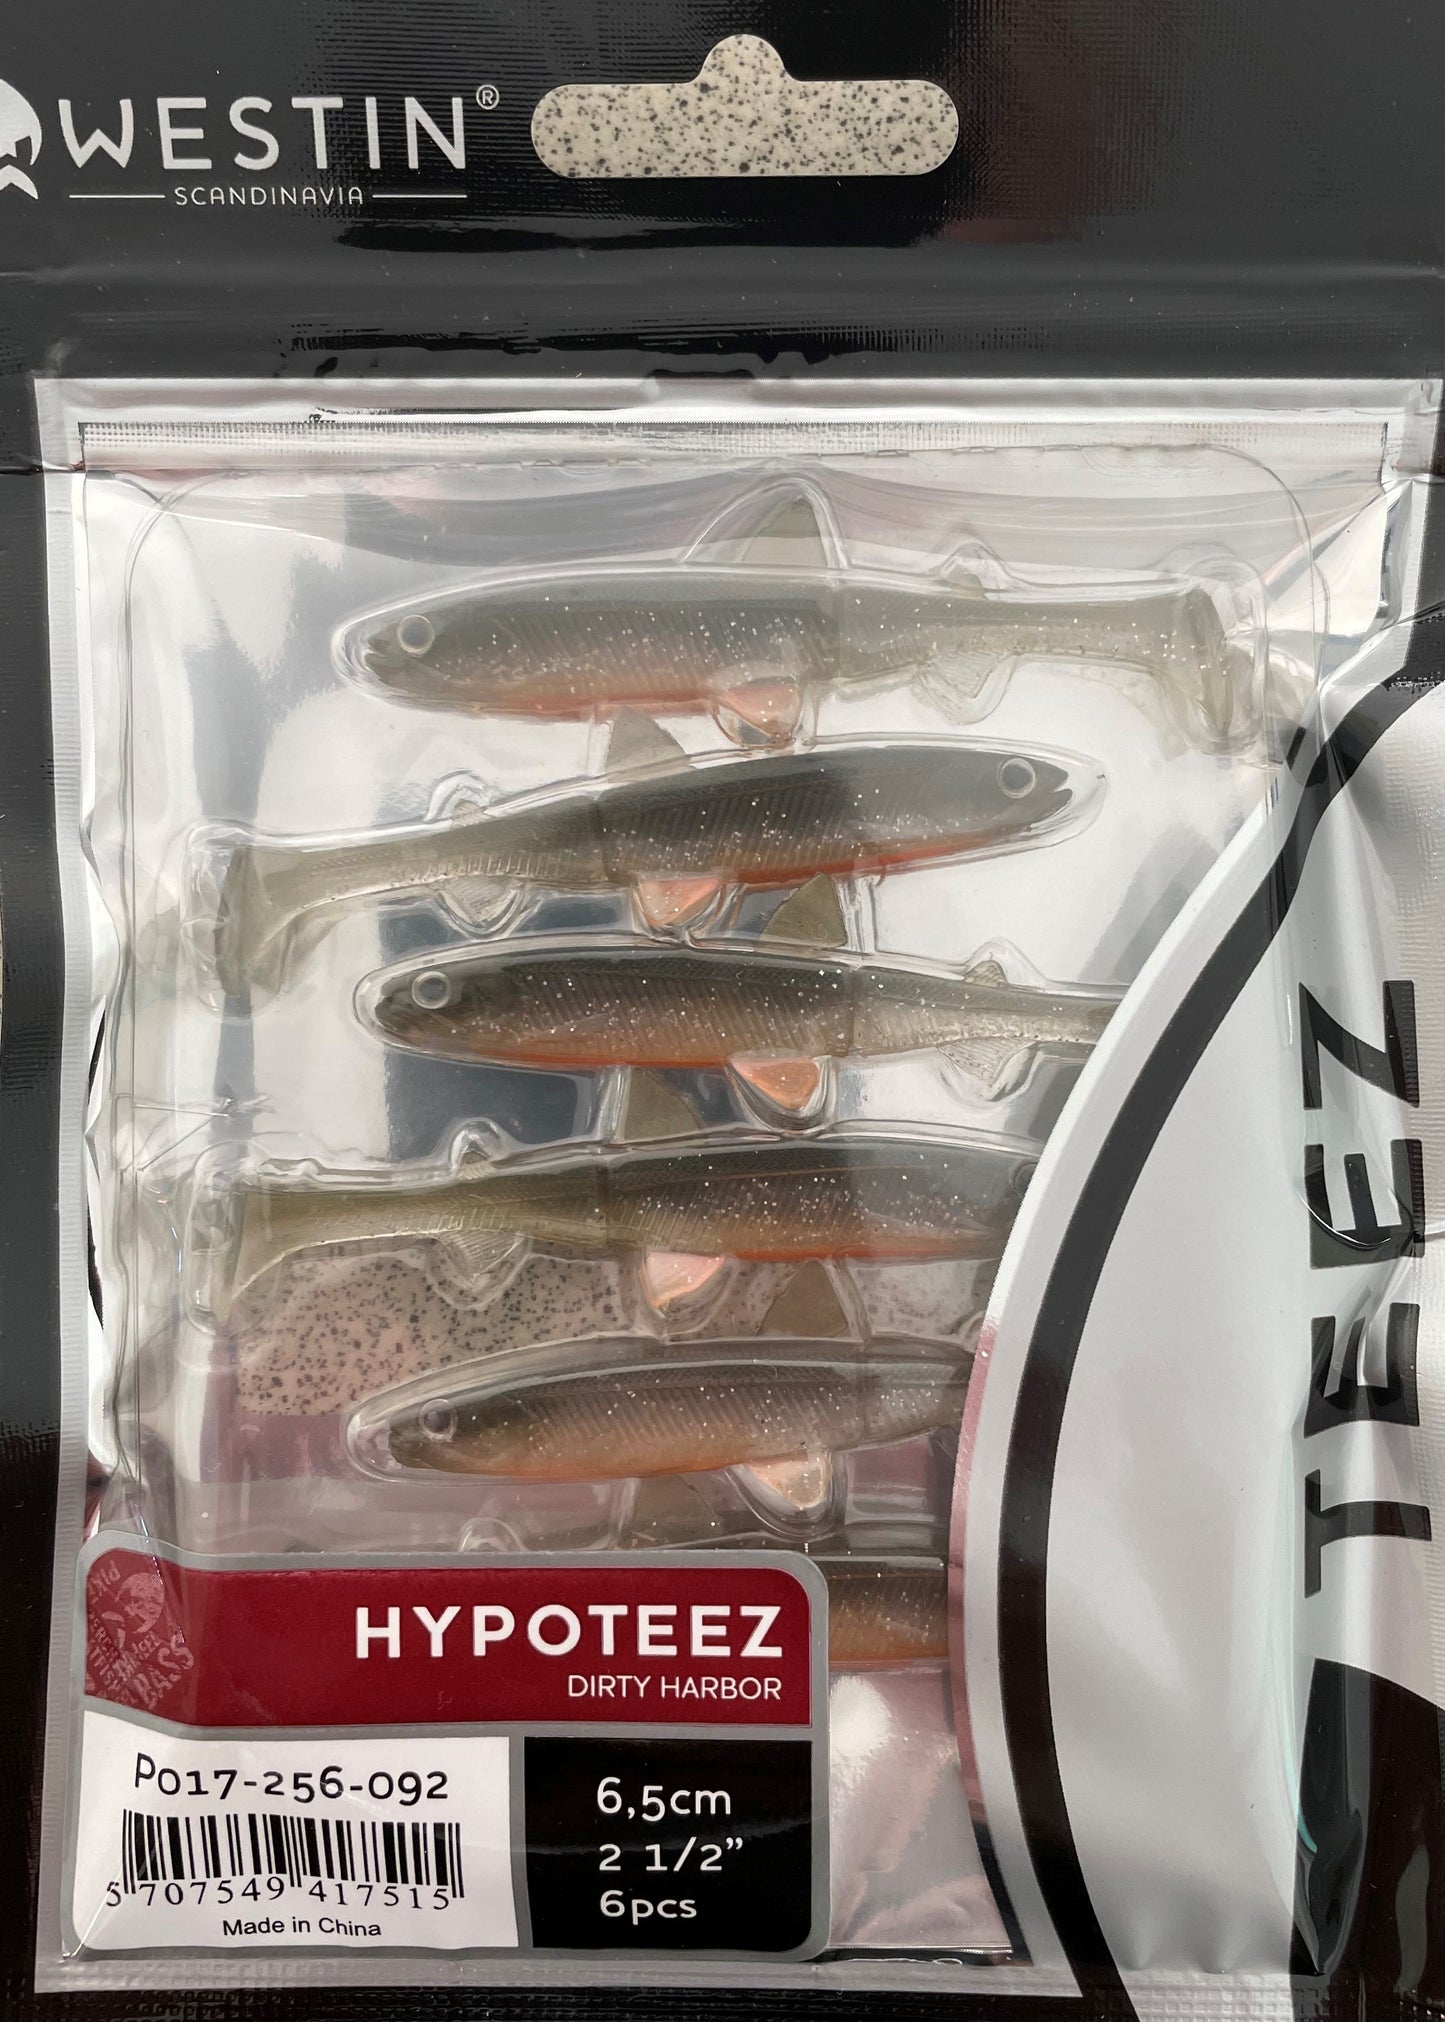 Westin Hypoteez 6.5cm - Dirty Harbor (6 Pack)